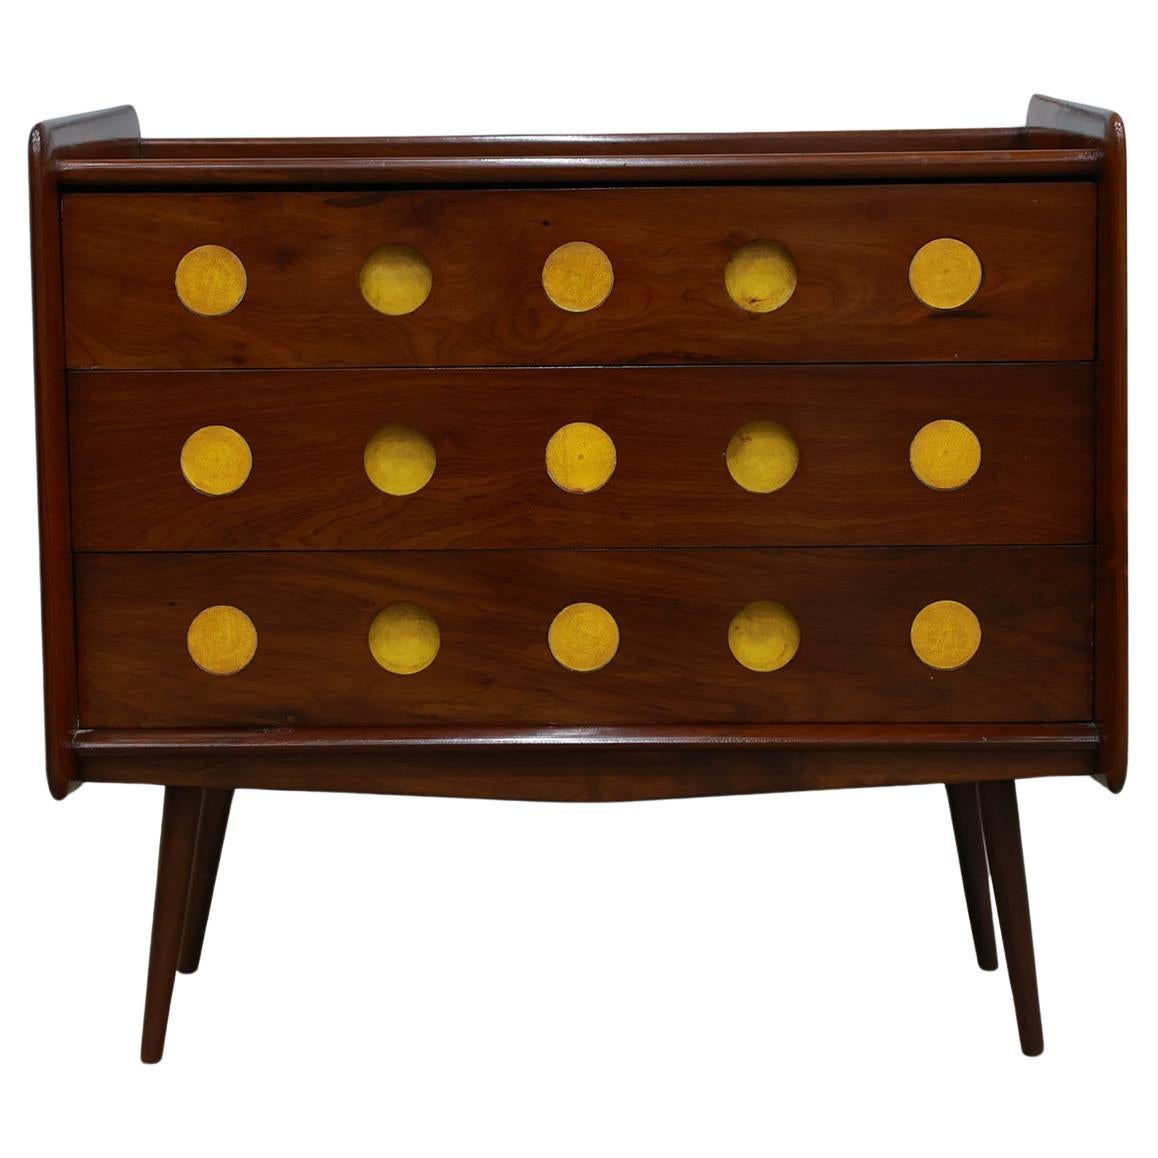 Brazilian Modern Chest of Drawers in Hardwood by Moveis Cimo, 1950s, Brazil